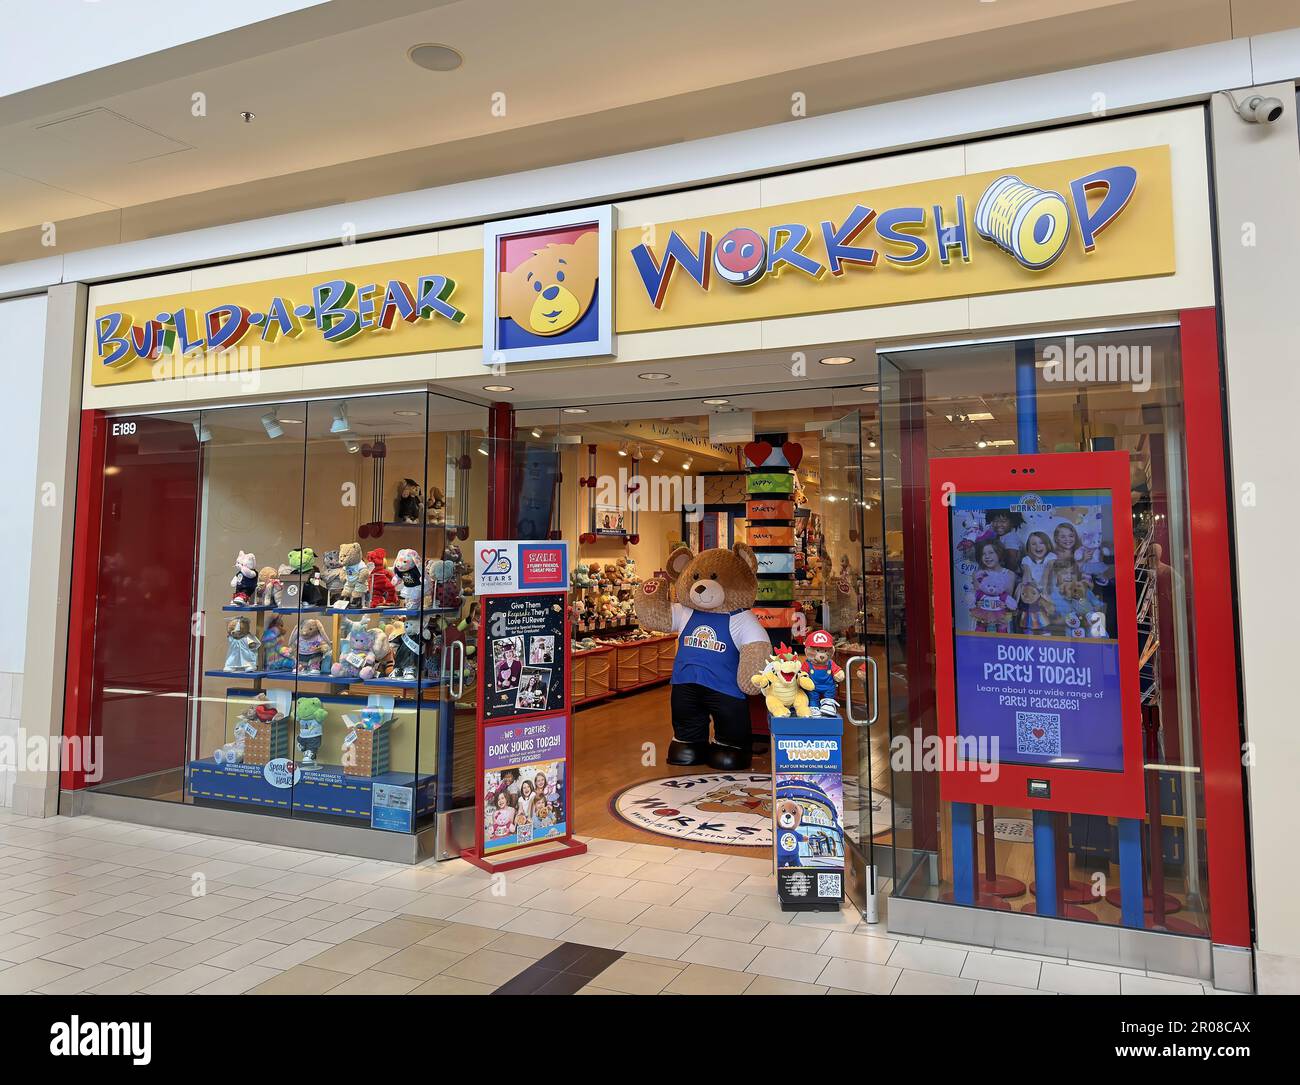 Build A Bear Workshop storefront indoors, night time USA Stock Photo